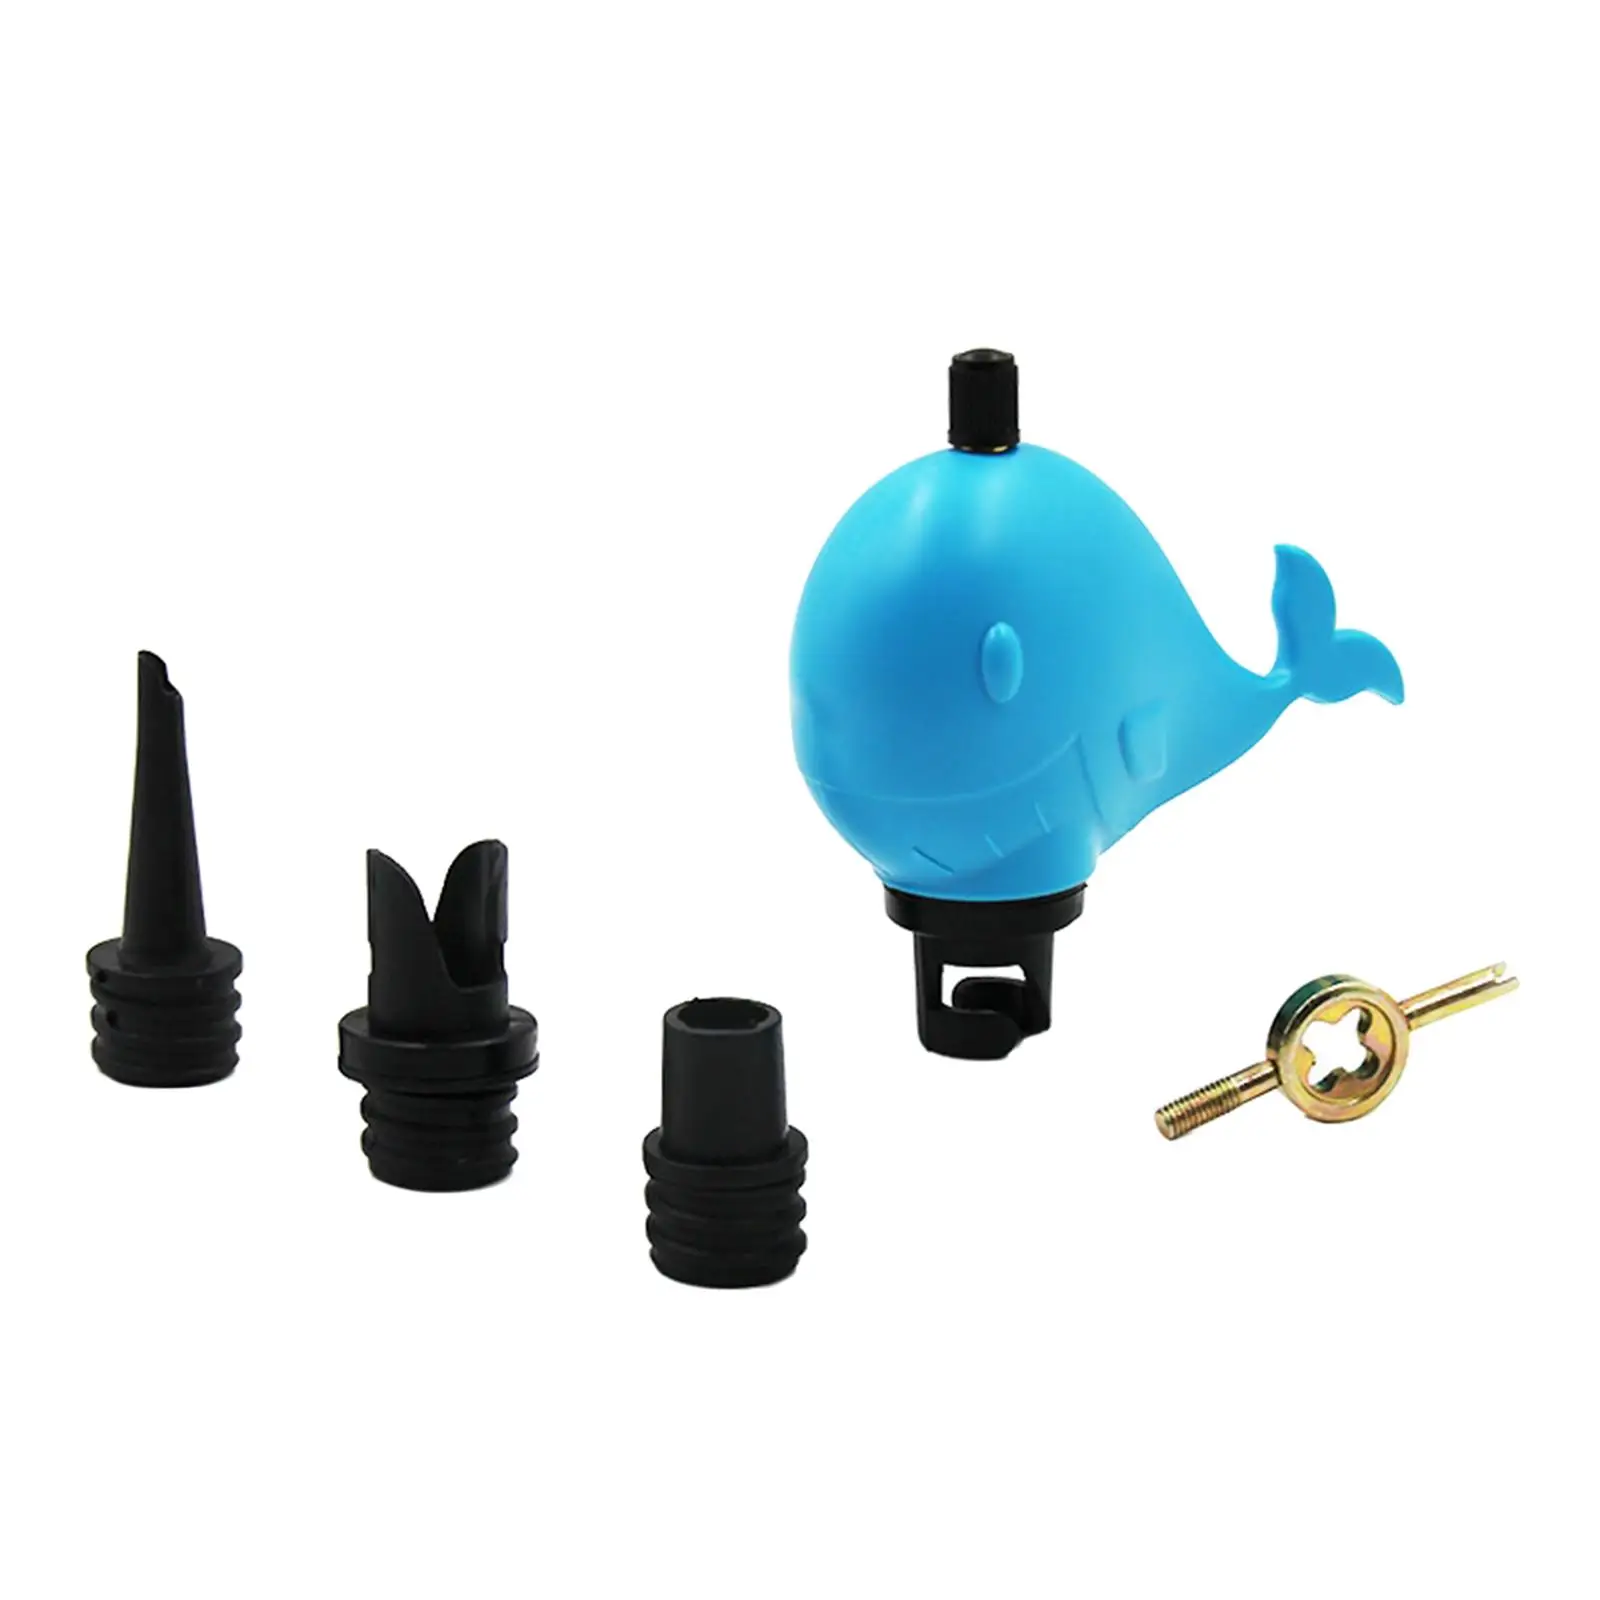 Valves Adapter Durable Adapter Inflatable Boat Pump Adaptor Boat Pump Adaptor for Kayak Canoe Paddle Board Raft Attachments